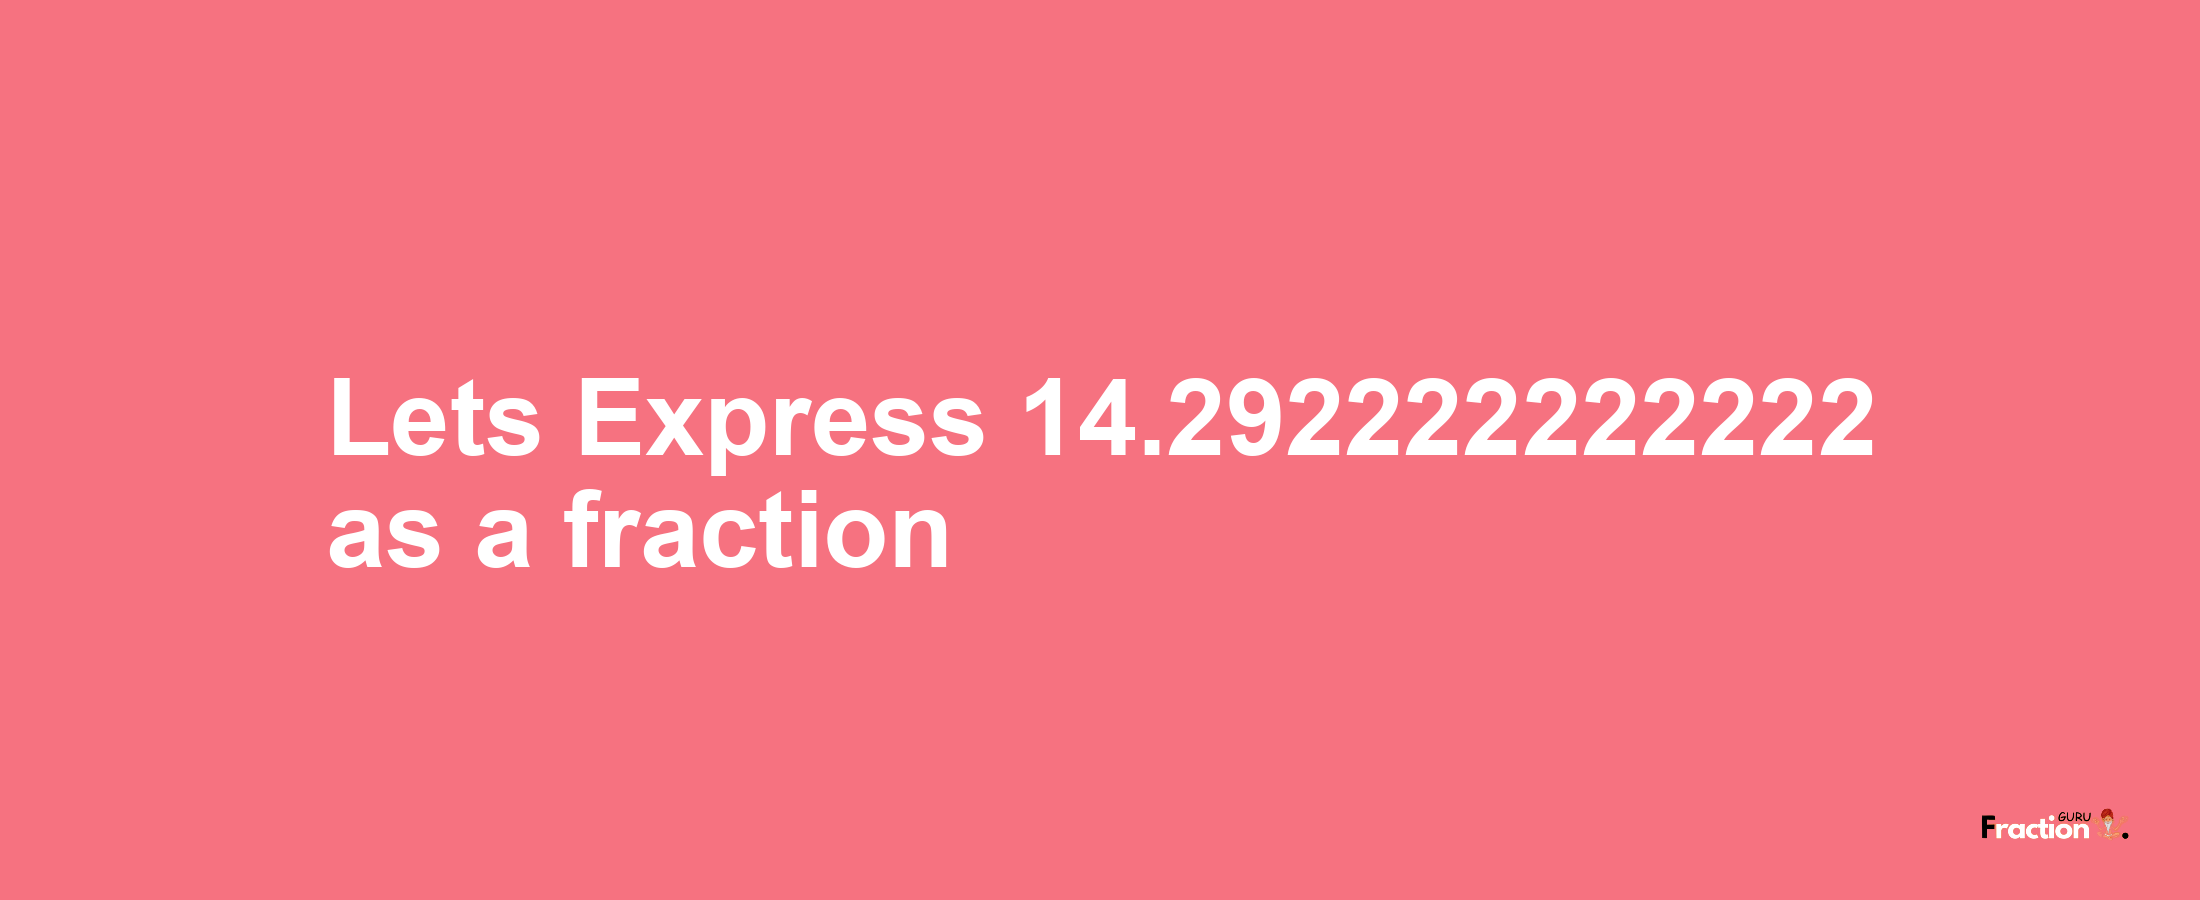 Lets Express 14.292222222222 as afraction